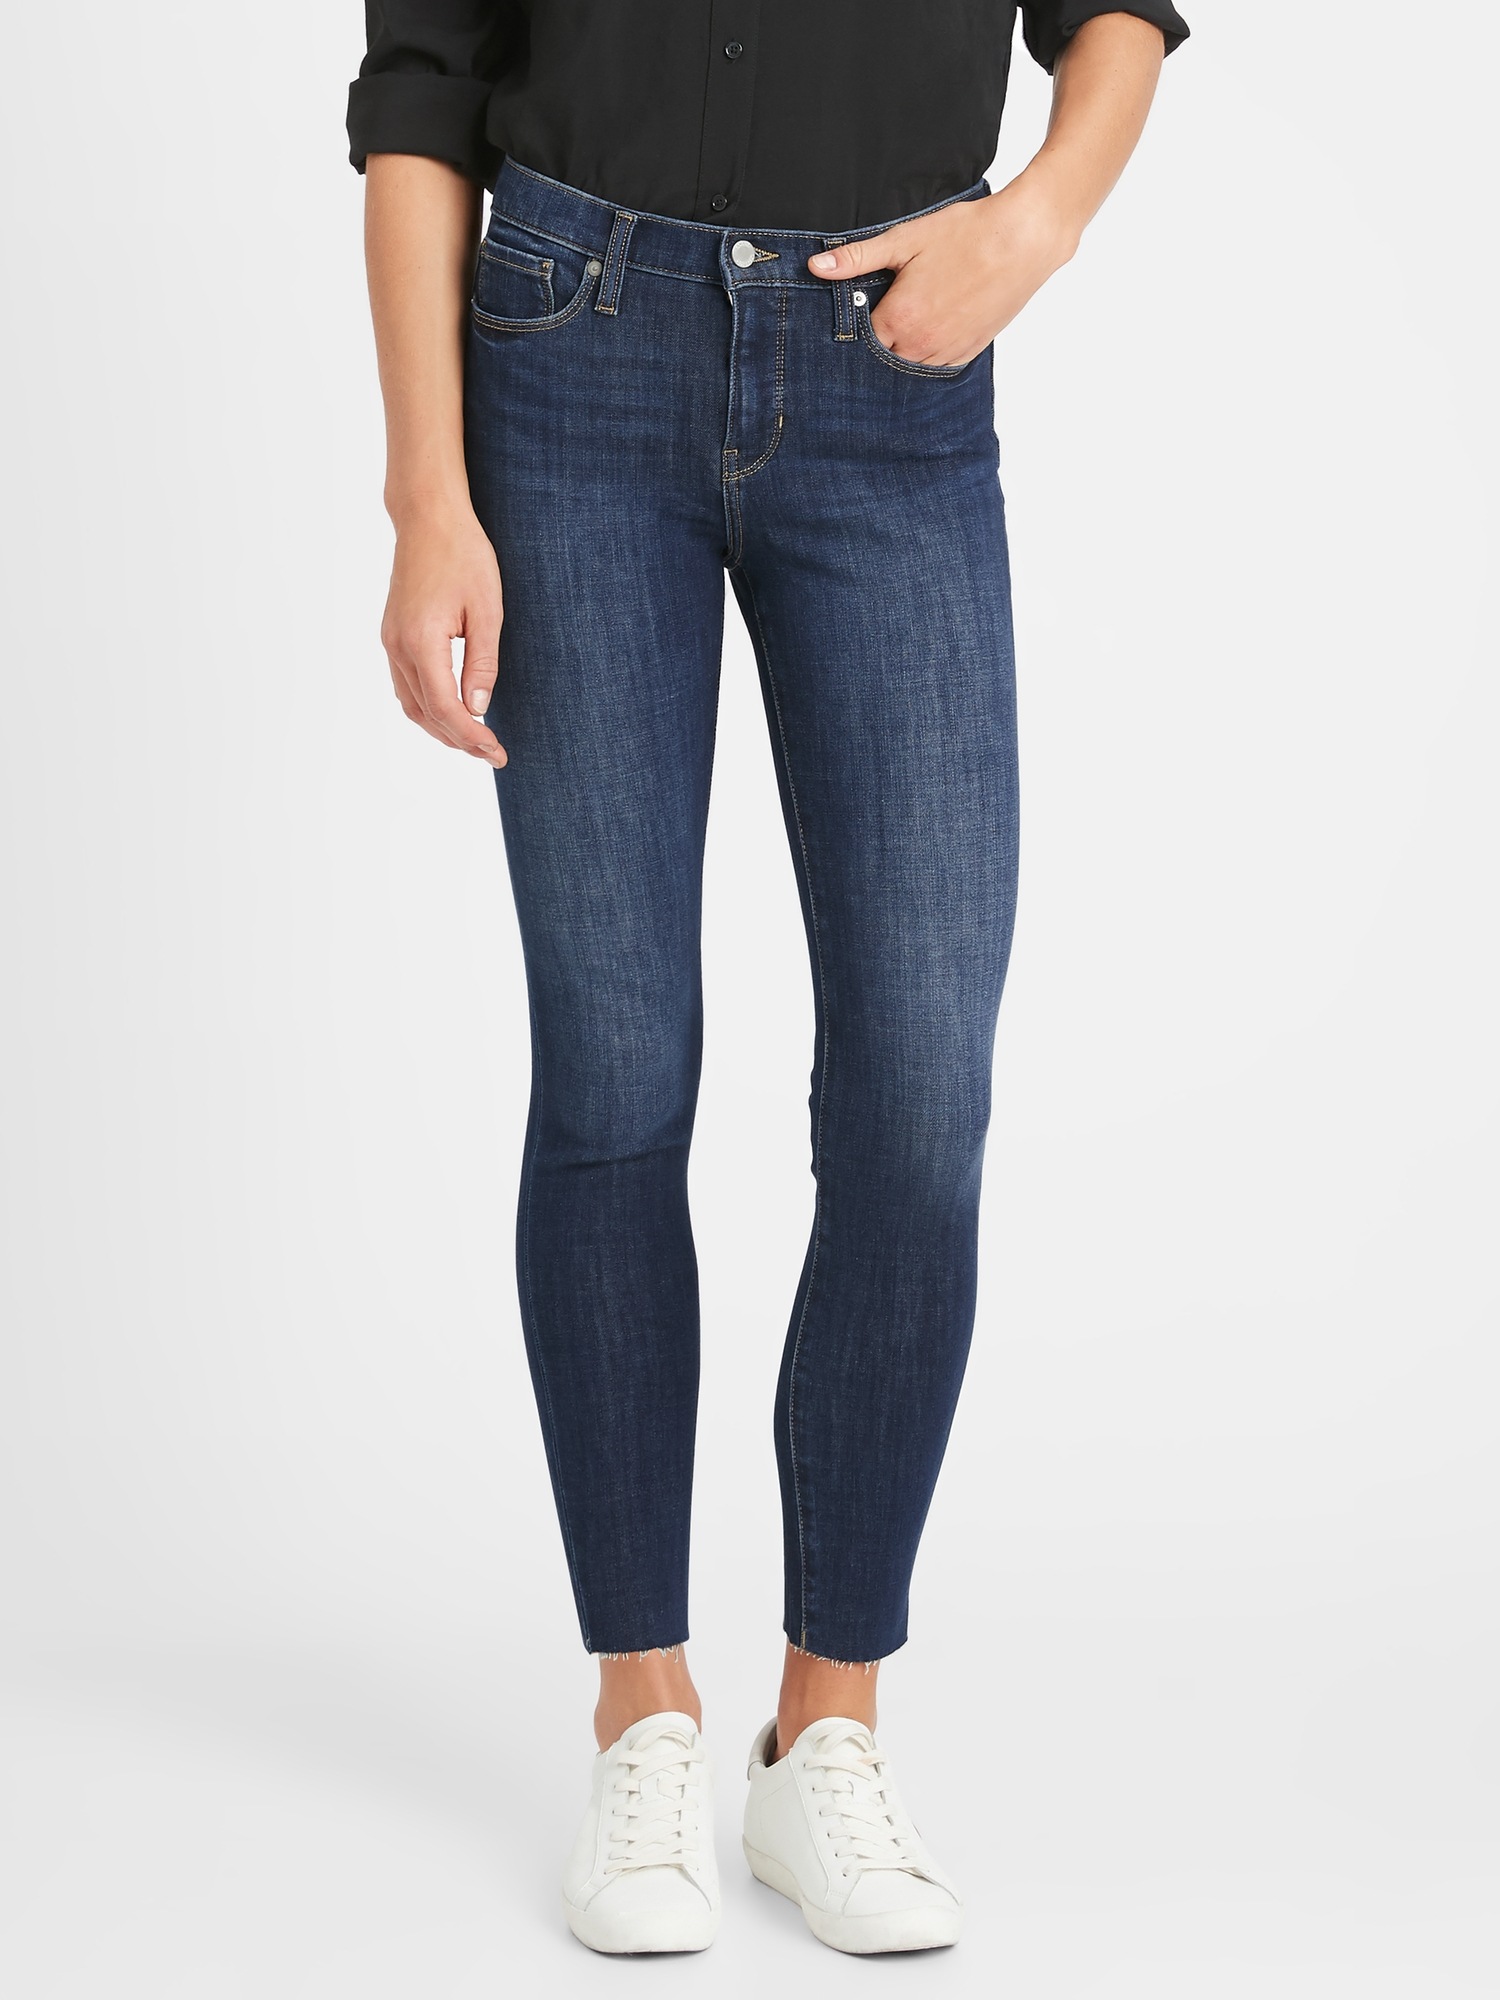 Mid-Rise Skinny Ankle Jean with Raw Hem | Banana Republic